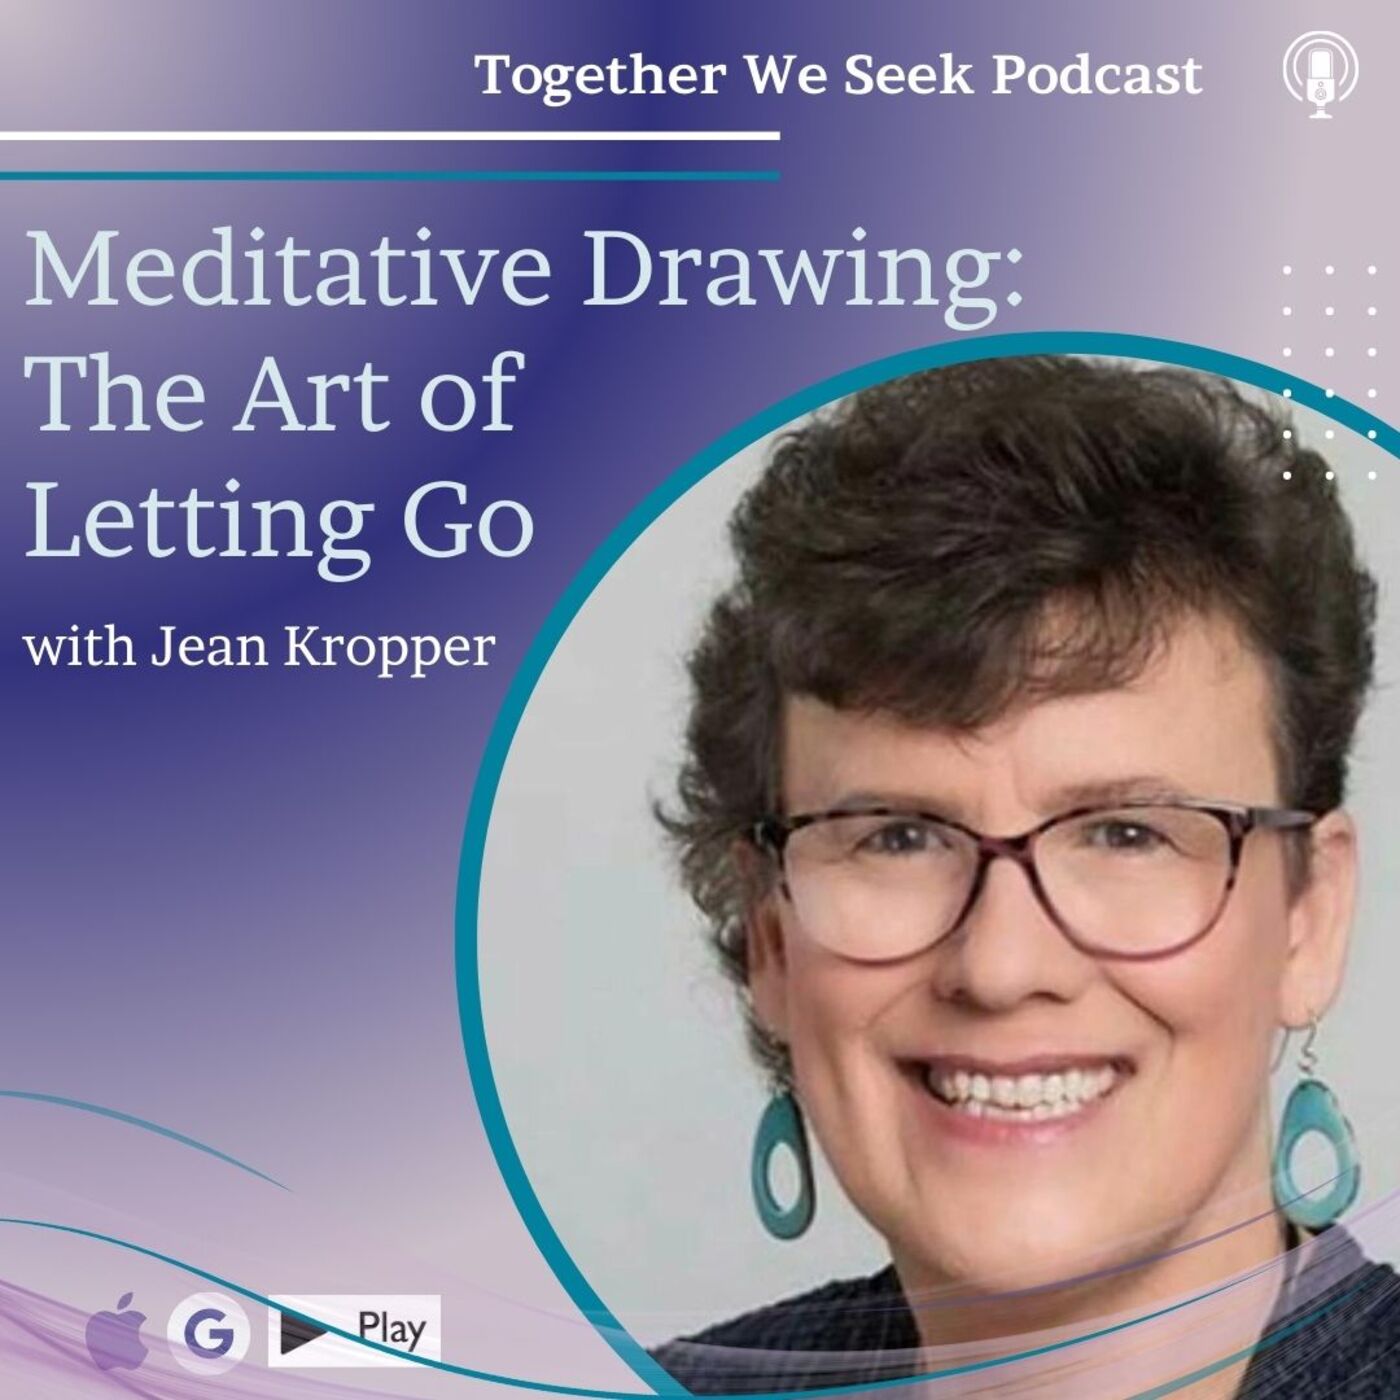 Meditative Drawing: The Art of Letting Go with Jean Kropper